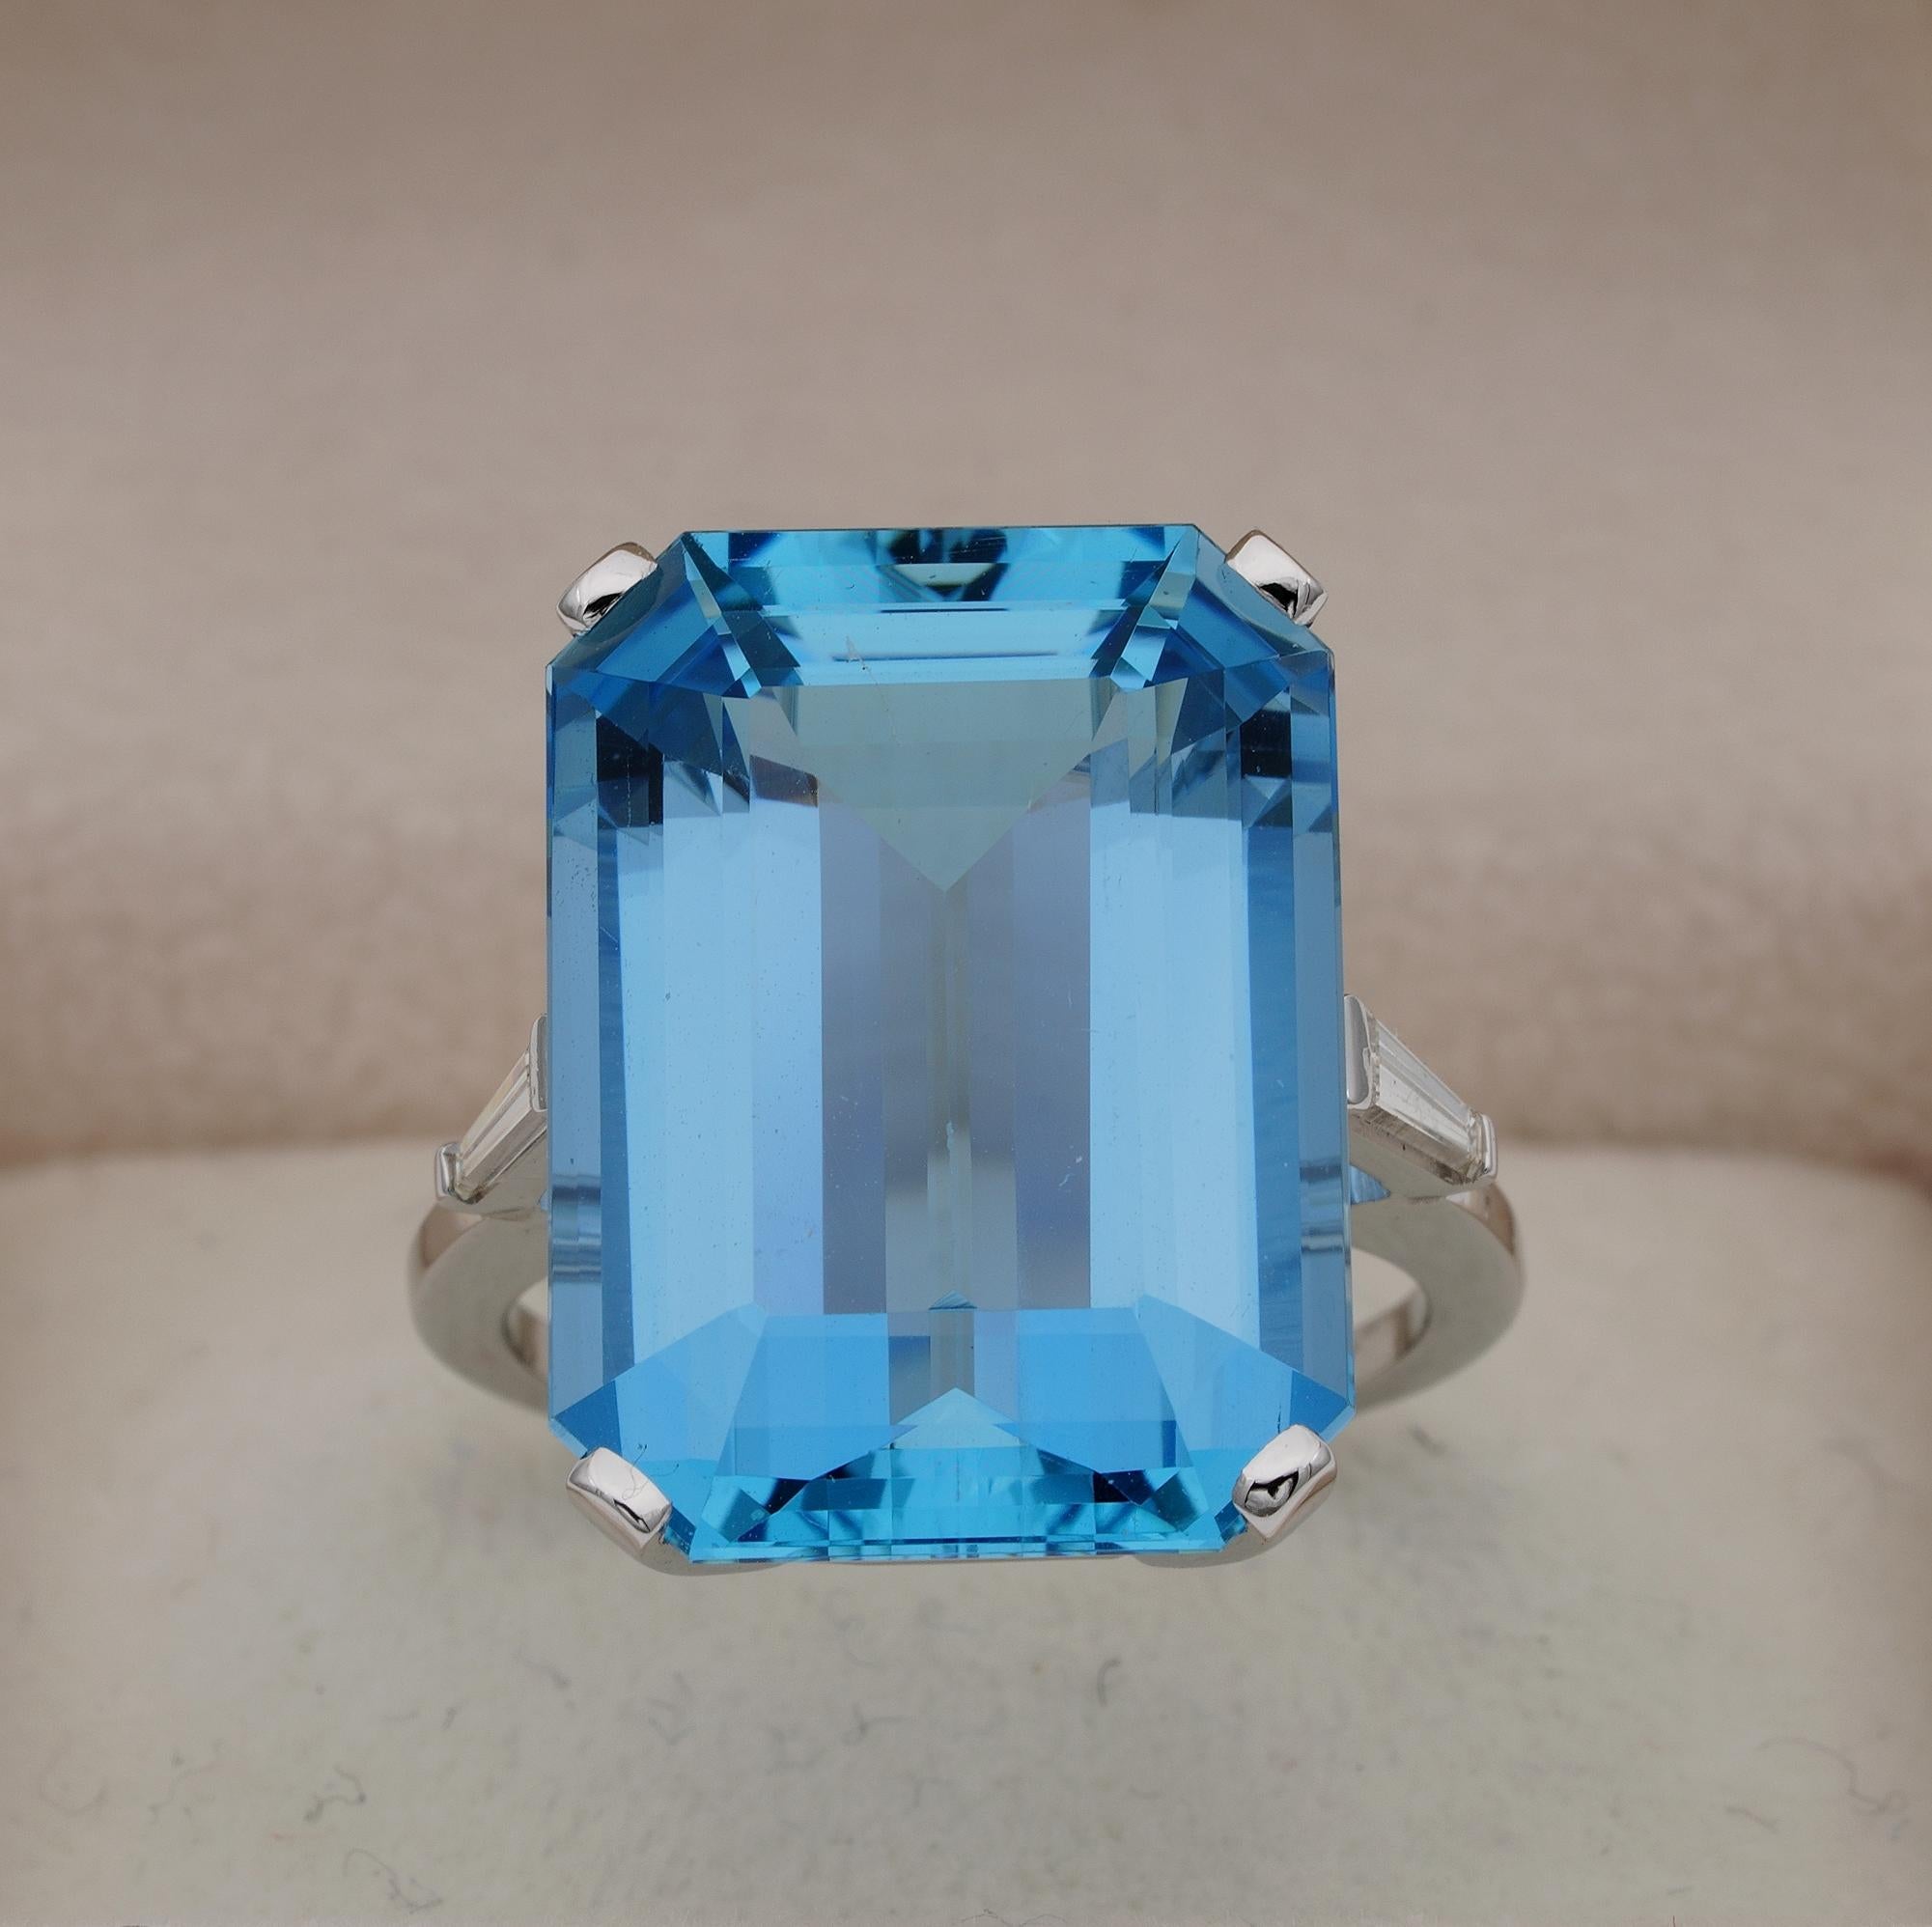 The Dreaming Blue

Striking large sized mid century Aquamarine ring – 1960 ca
Beautiful simple design exalting the rare colour of the Aquamarine which alone makes a true statement
Emerald cut natural Aquamarine is the focus - excellent emerald cut